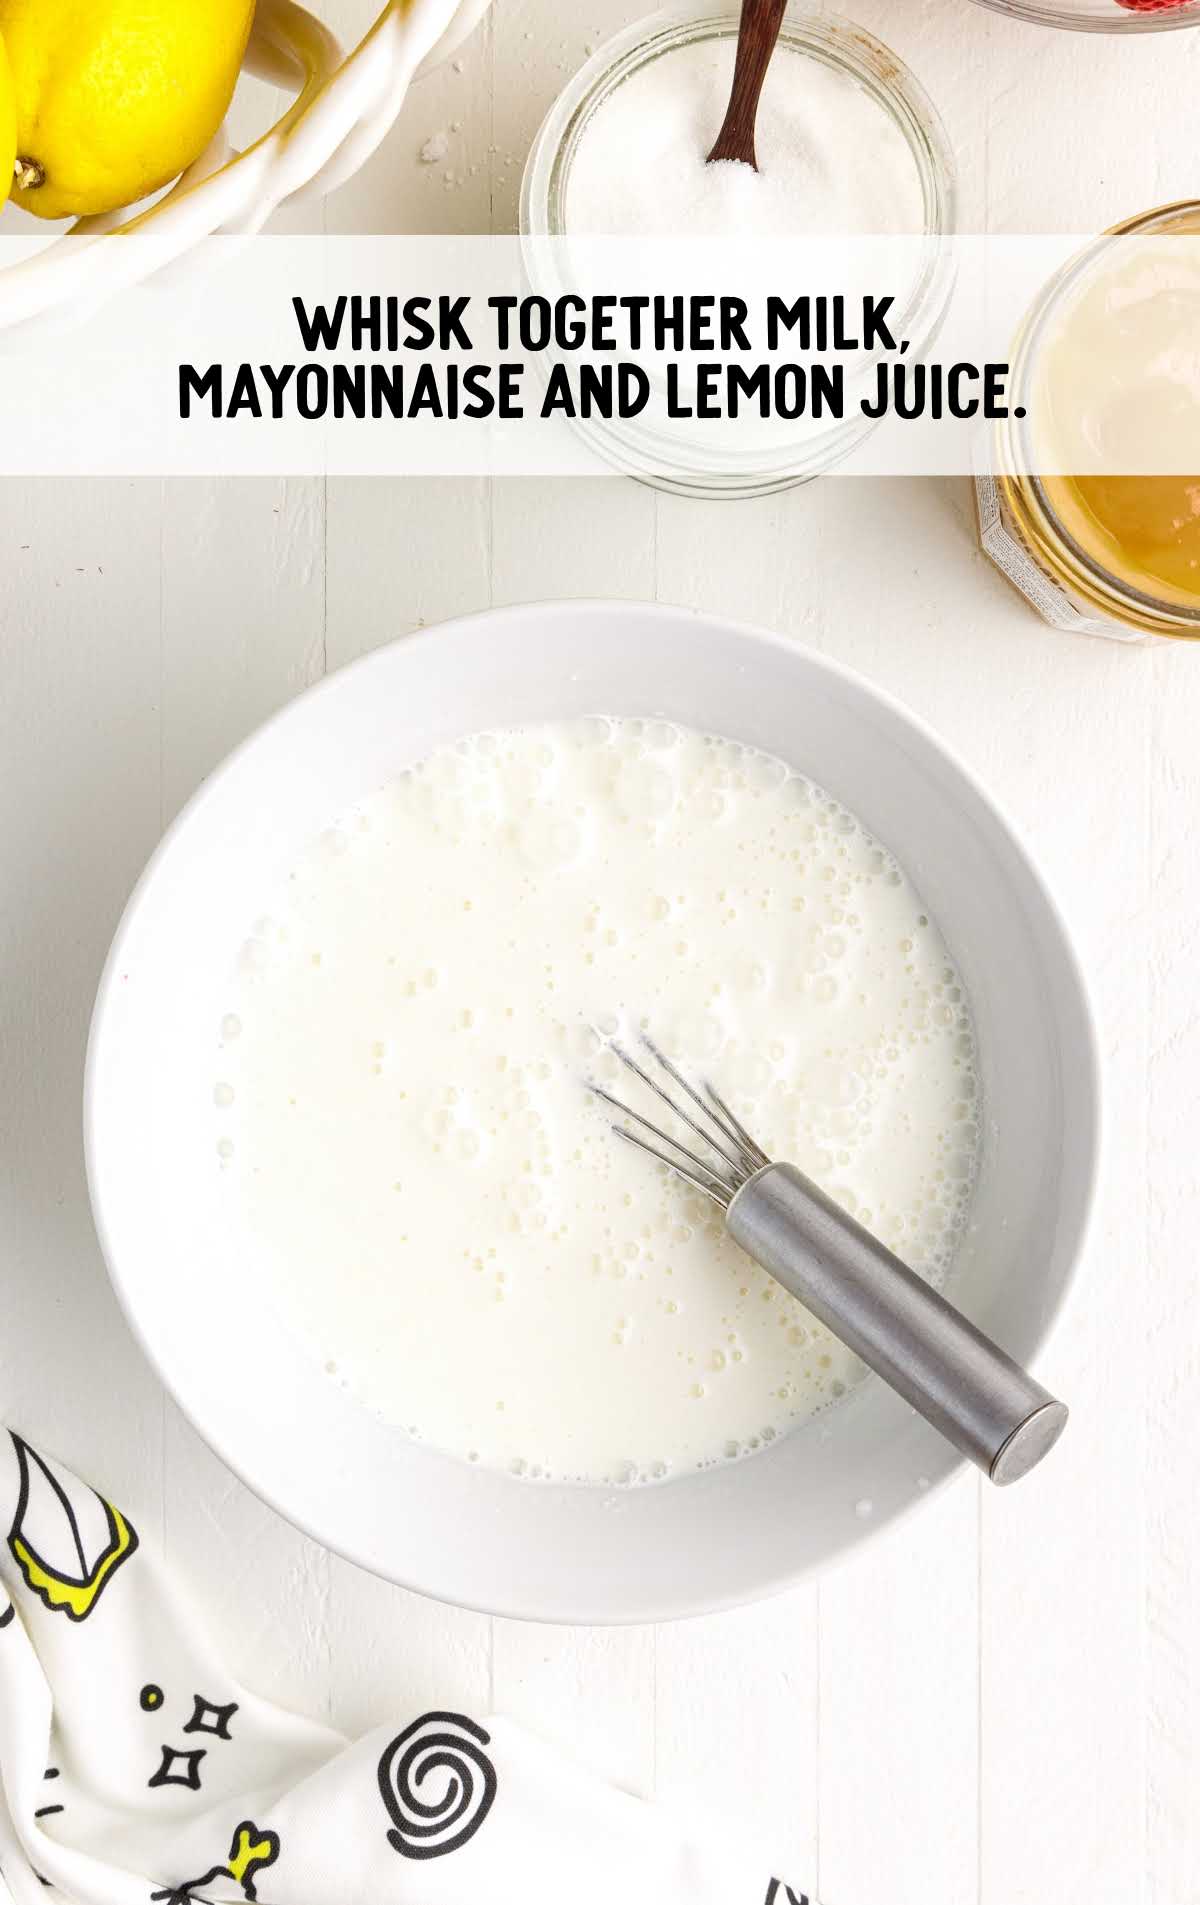 milk, mayonnaise and lemon juice whisked together in a bowl